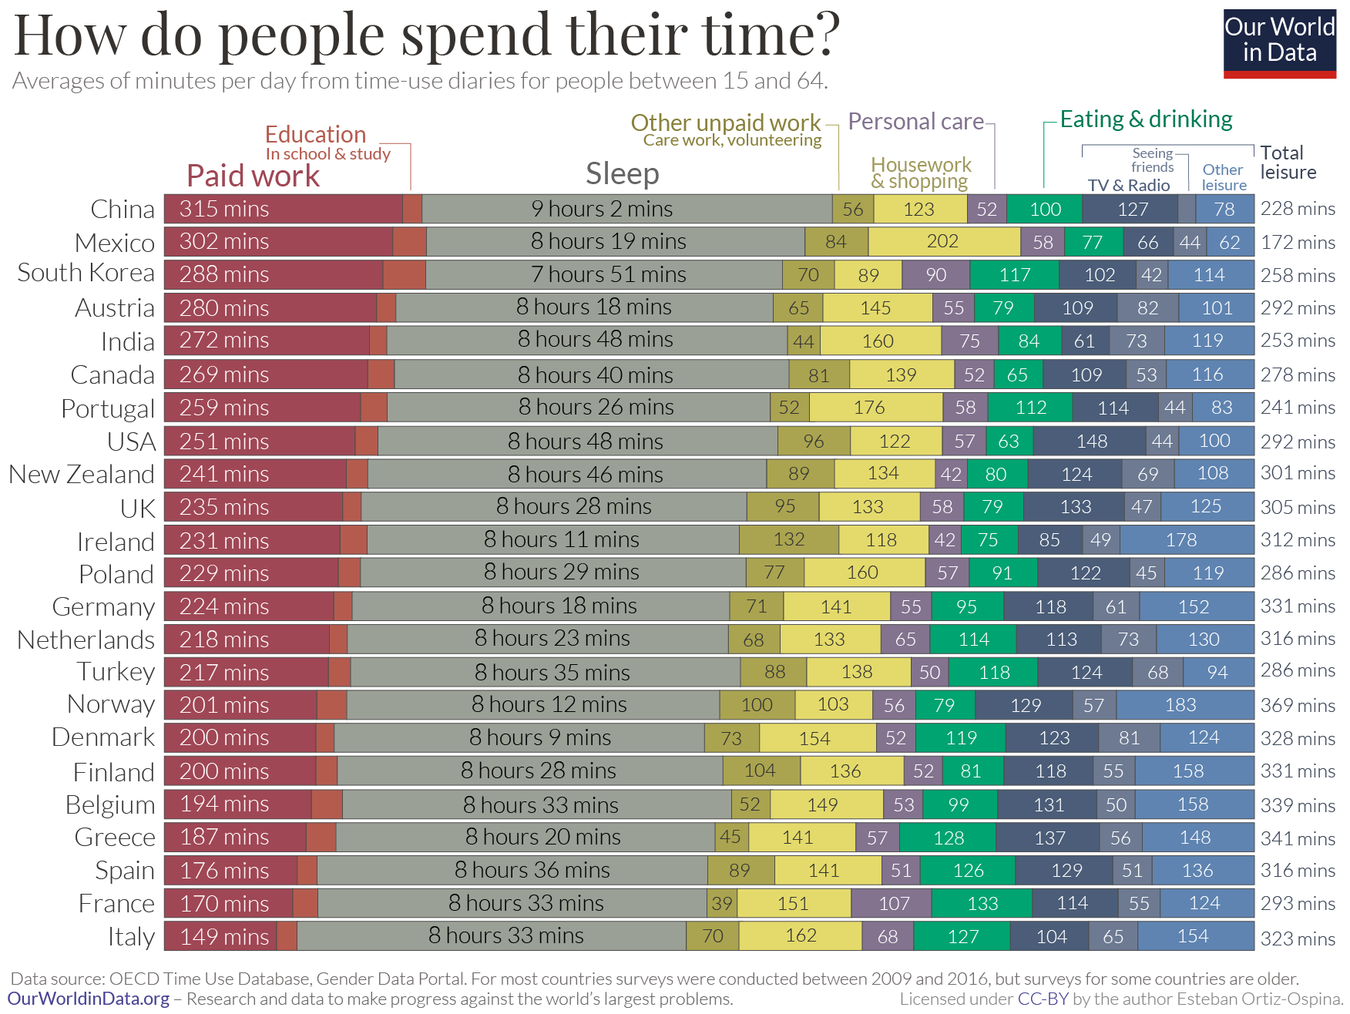 Time use by country